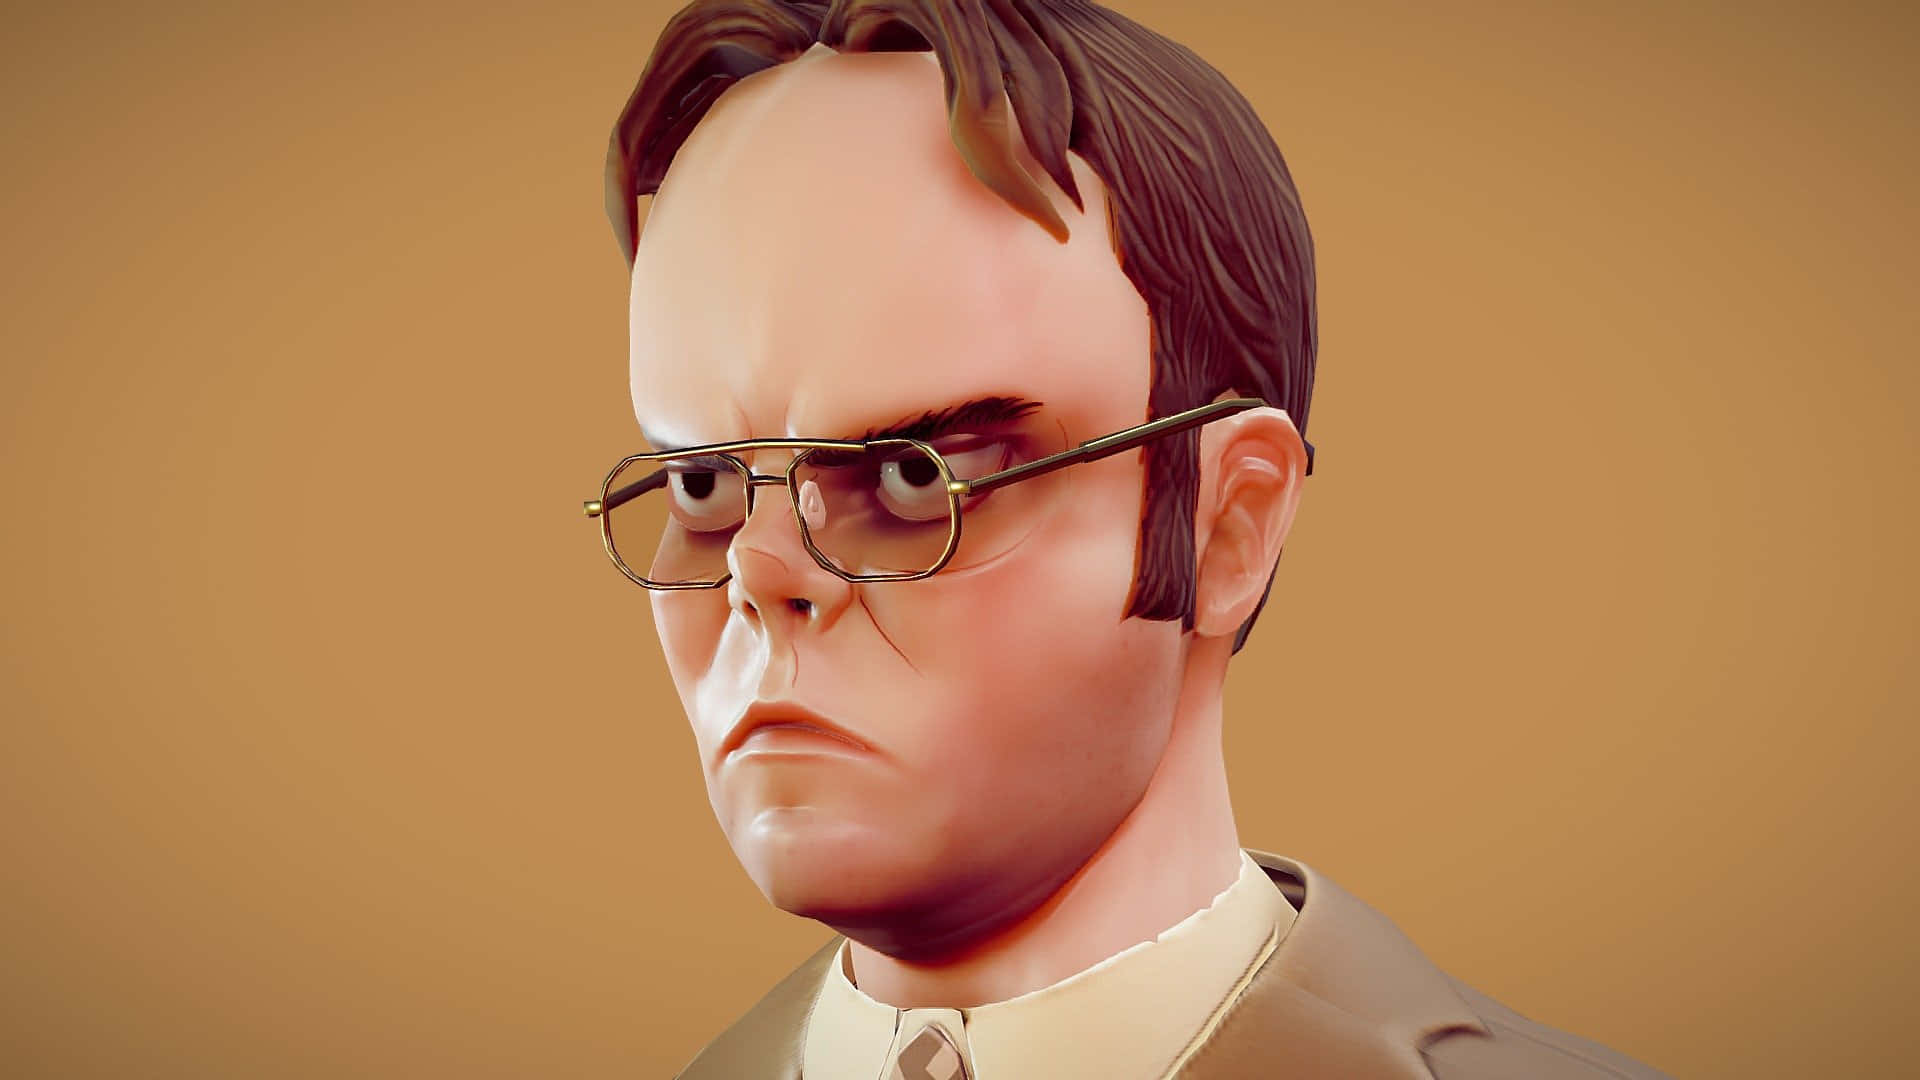 Dwight Schrute - The Hero of The Office Wallpaper